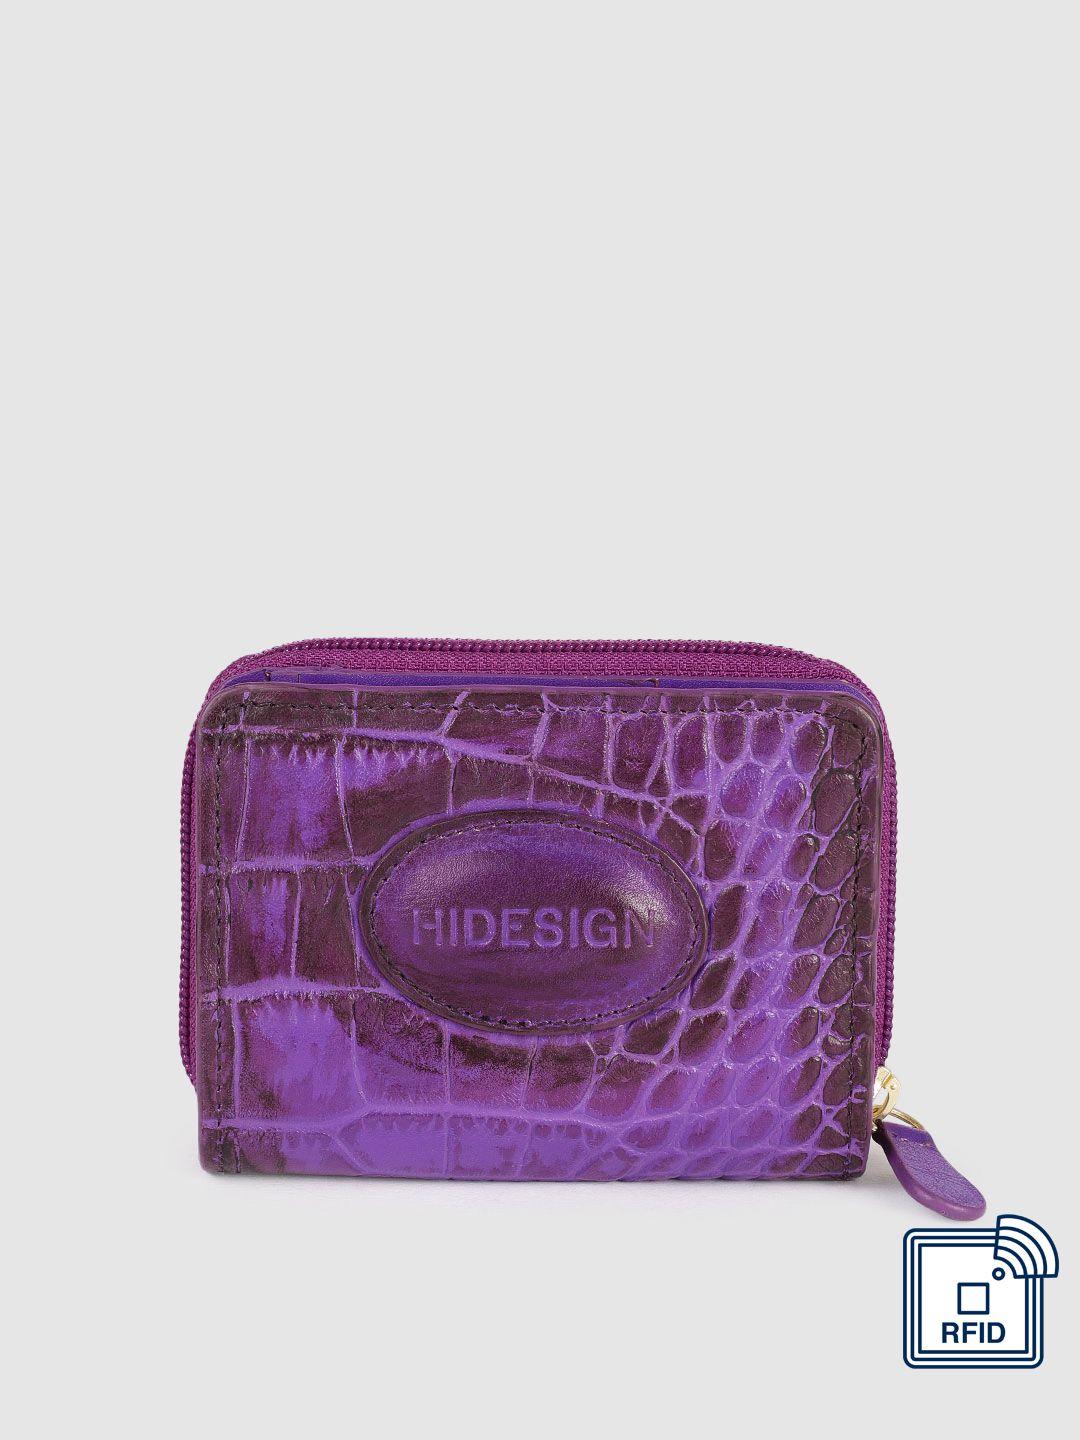 hidesign women purple animal textured leather two fold wallet